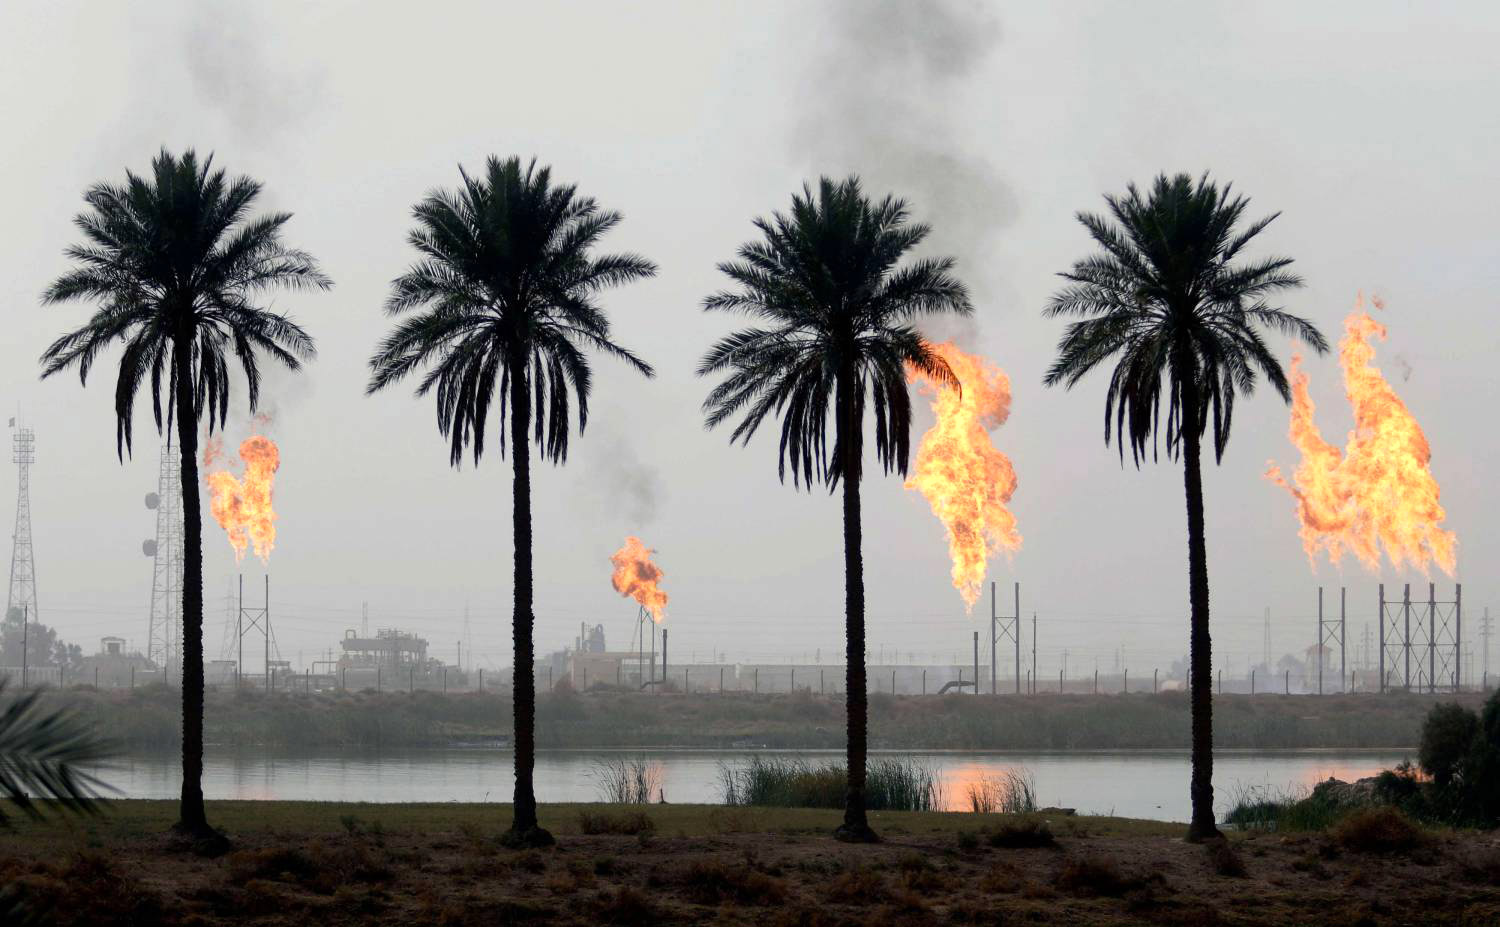 Basra crude prices to Asian markets dropped on Wednesday